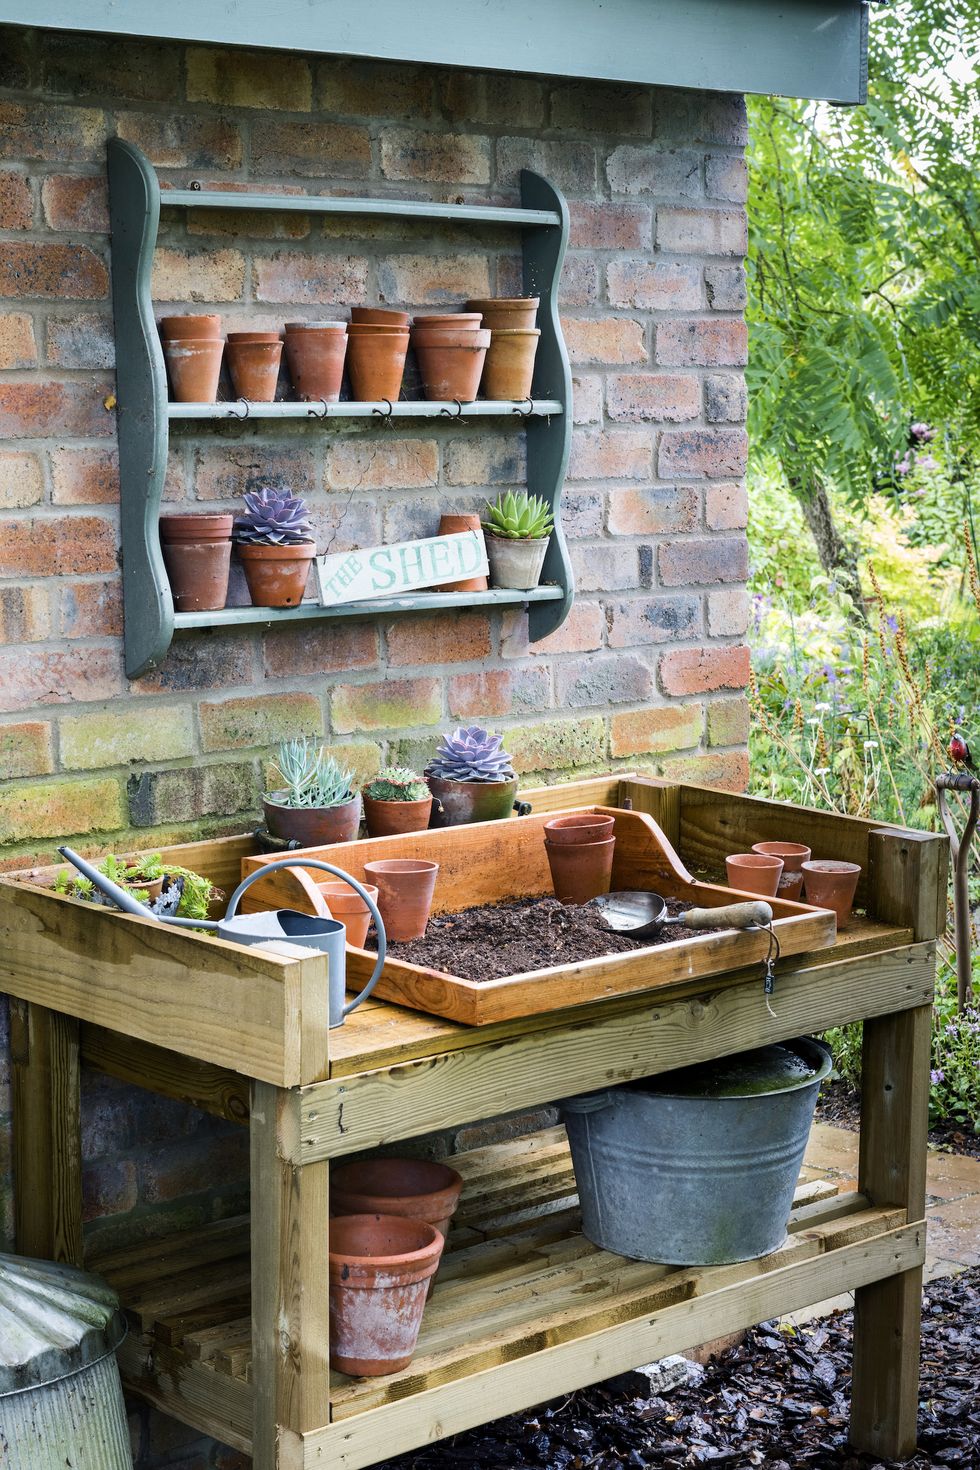 storage outer wall of potting shed with potting area, terracotta pots and pots of succulentsinclude a lower shelf for storage, plus others on walls above for little pots